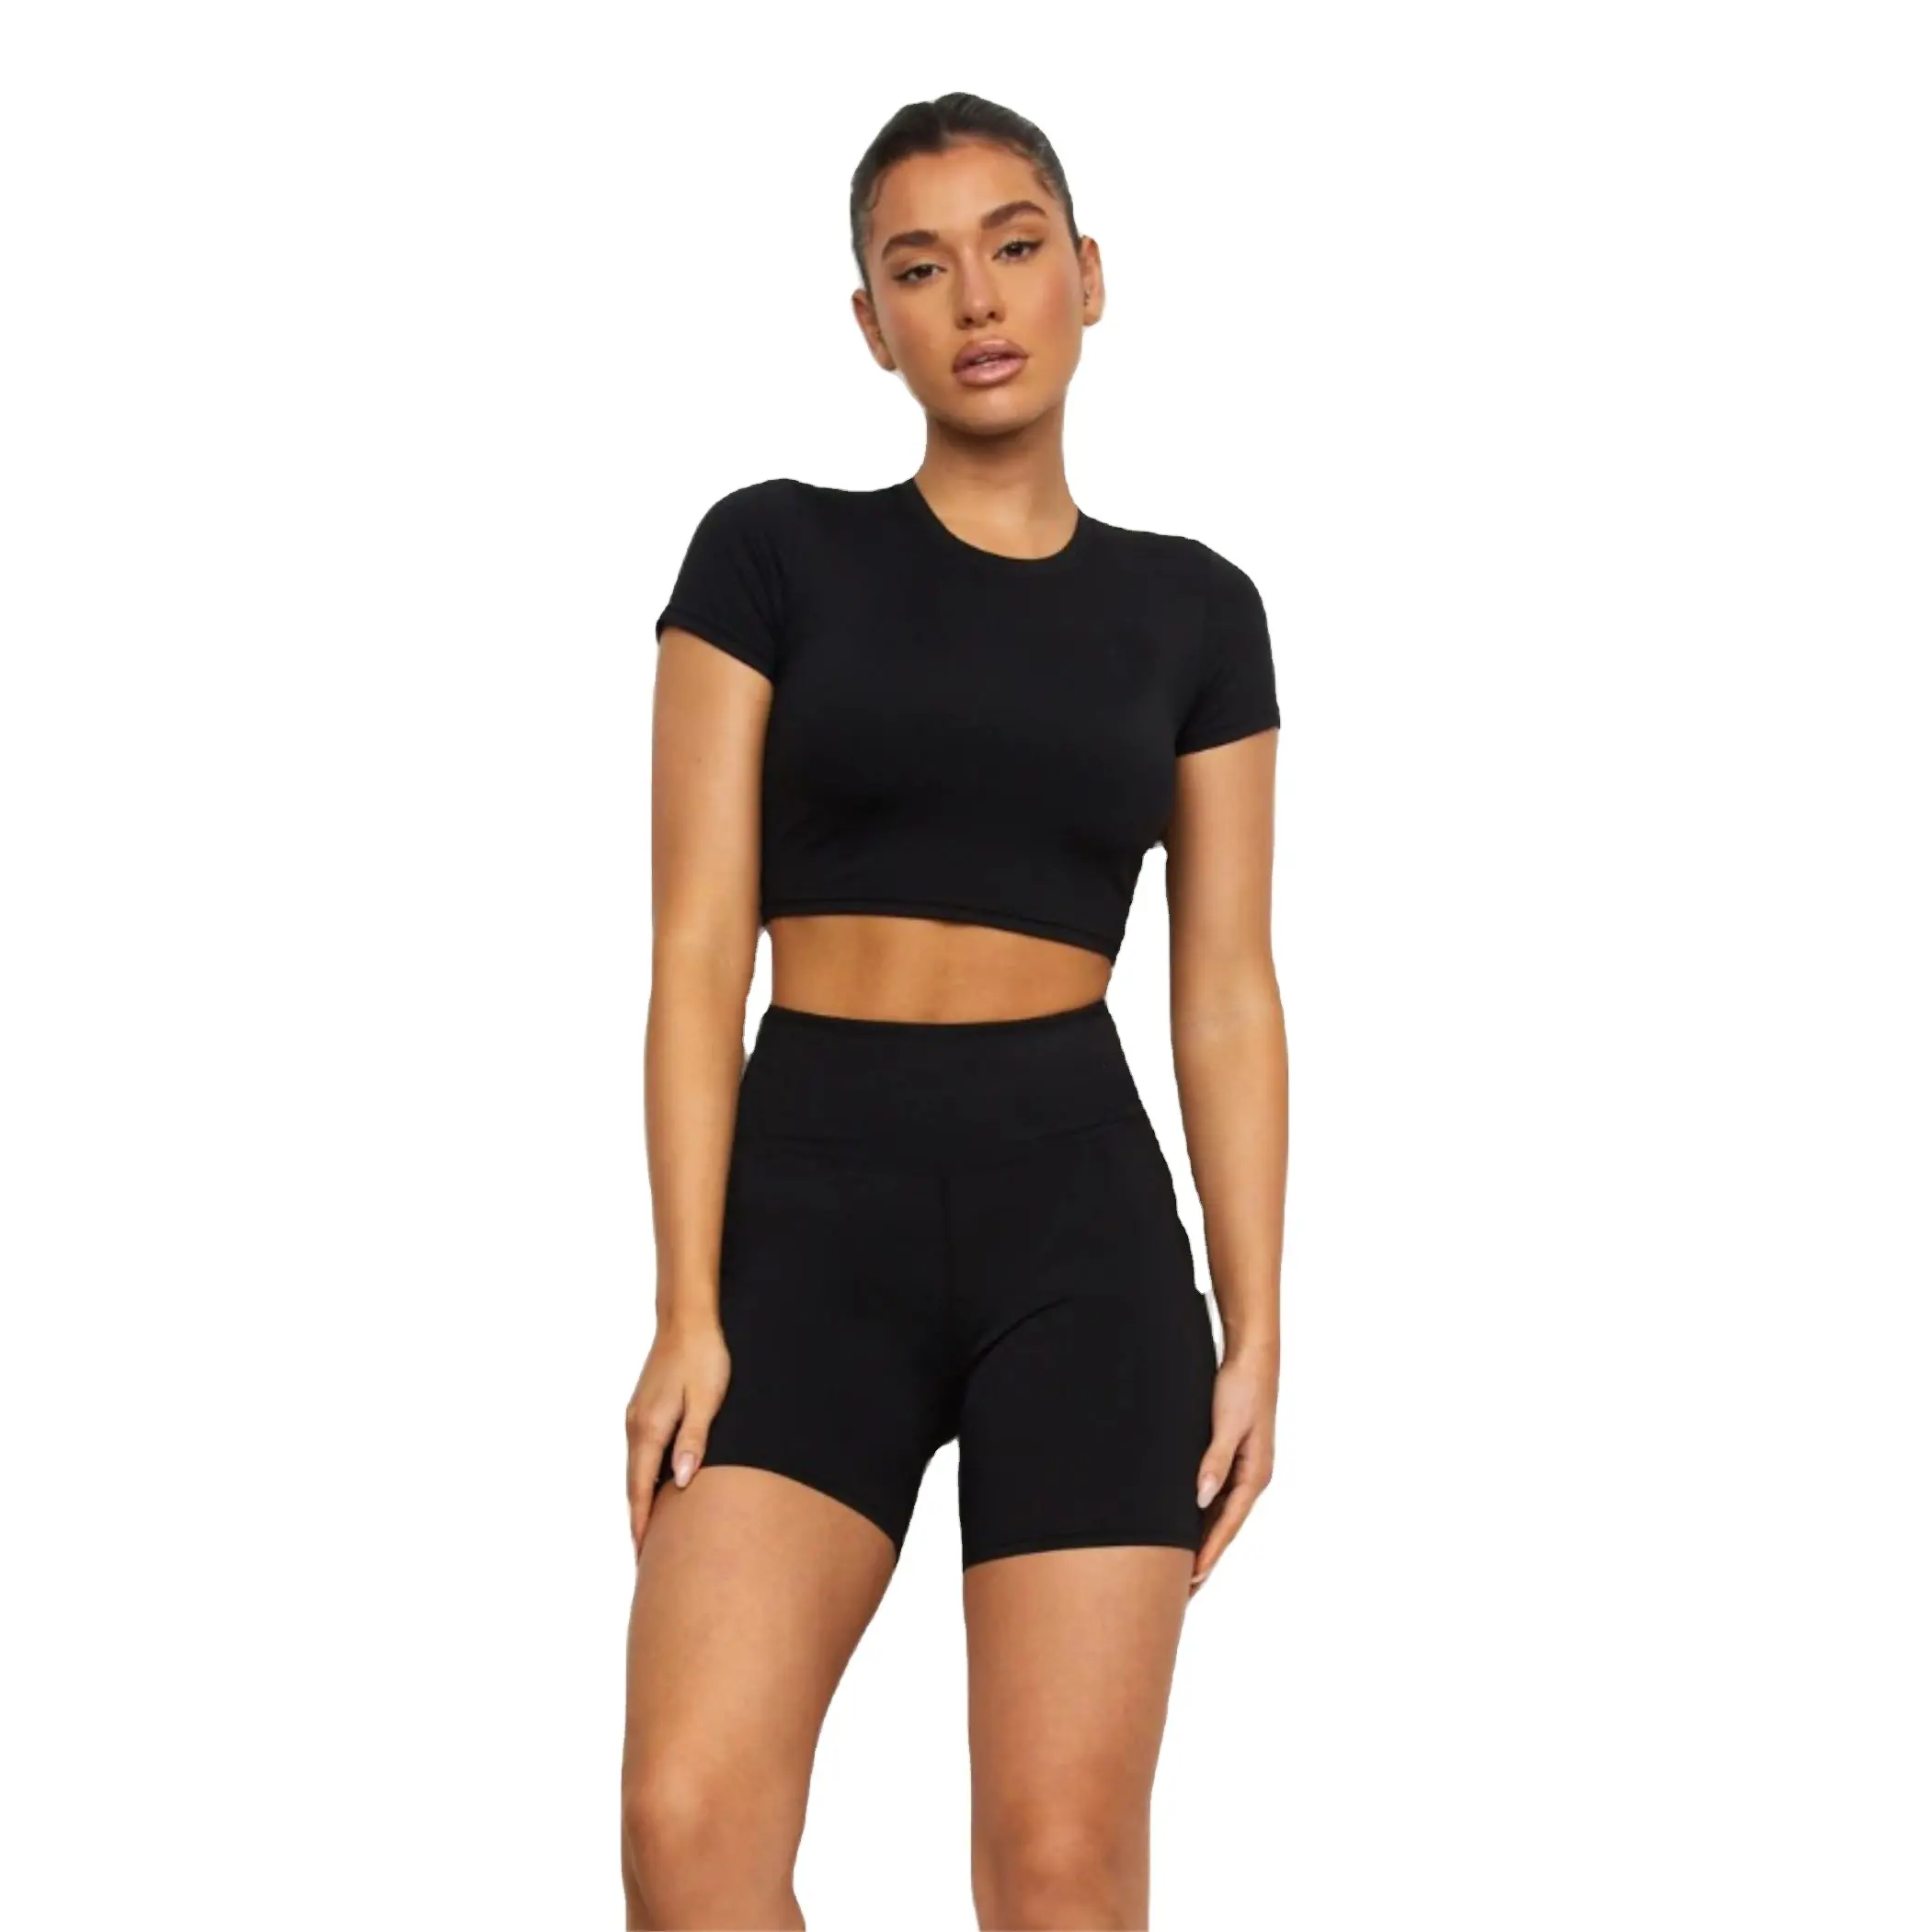 OEM Factory Betteractive Short Sleeve Plain Baby Tee, Round Neck Bodycon Crop Top Jogging Workout T Shirt